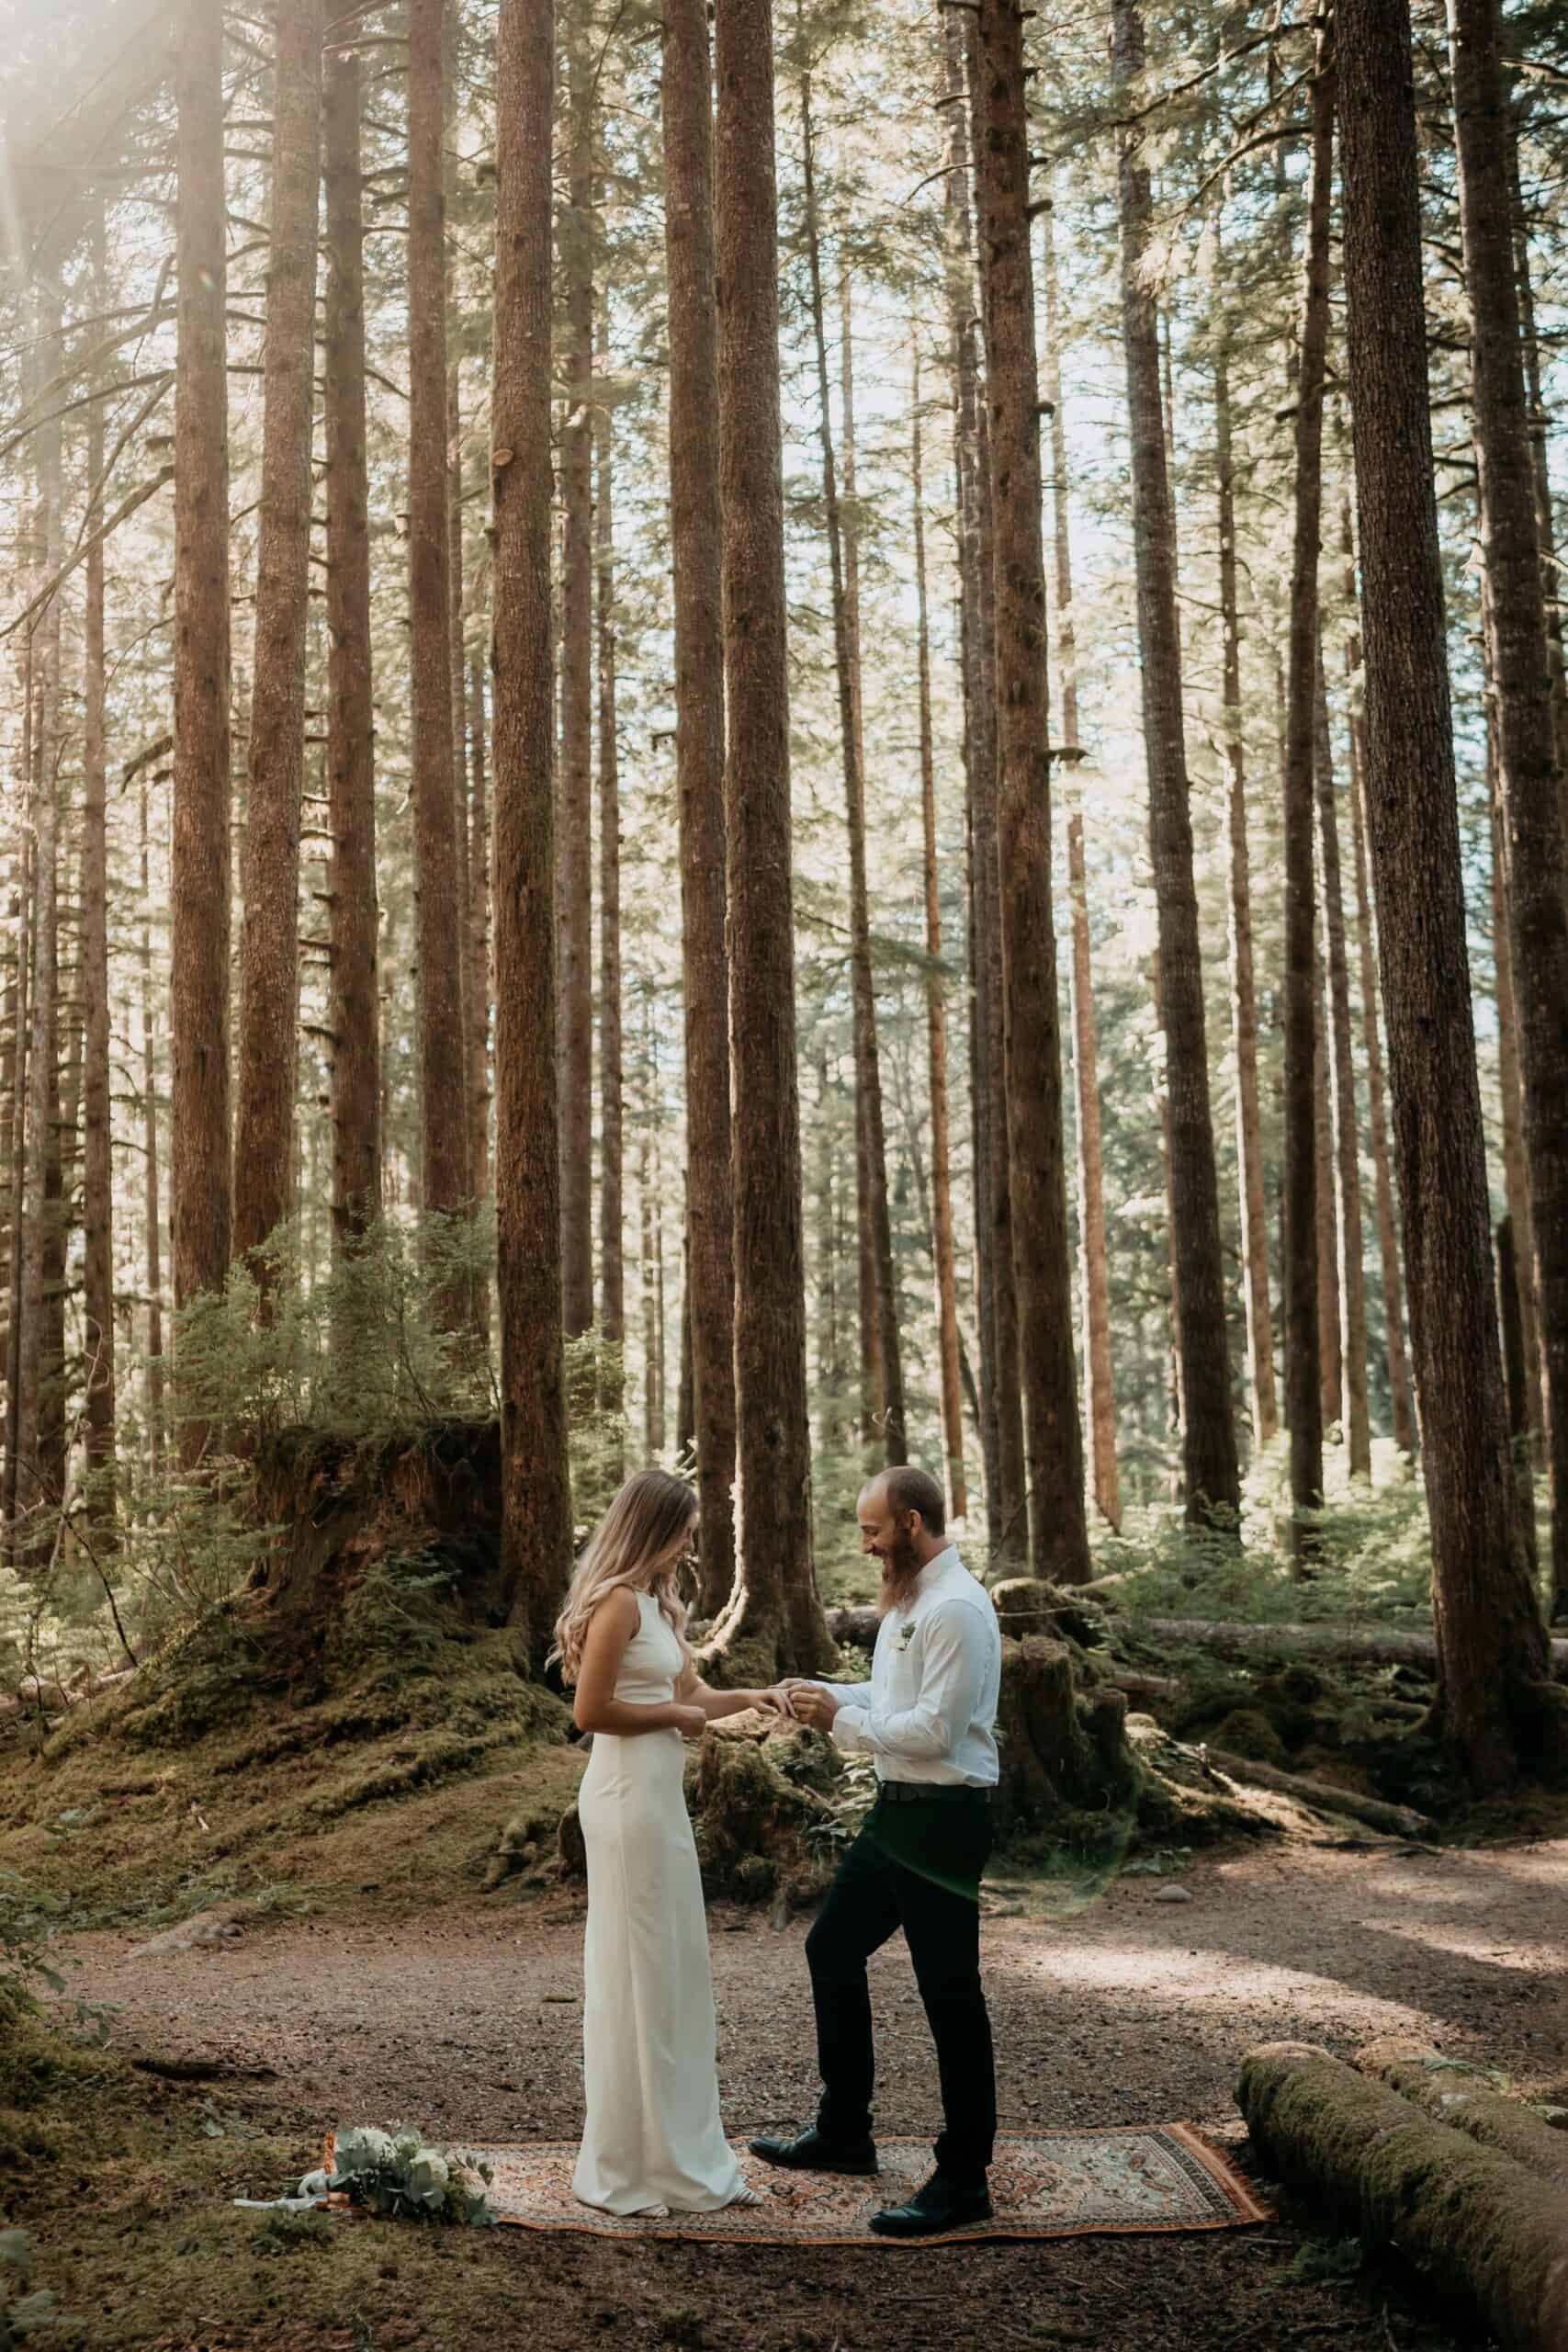 Best places to elope in the US: Forest locations